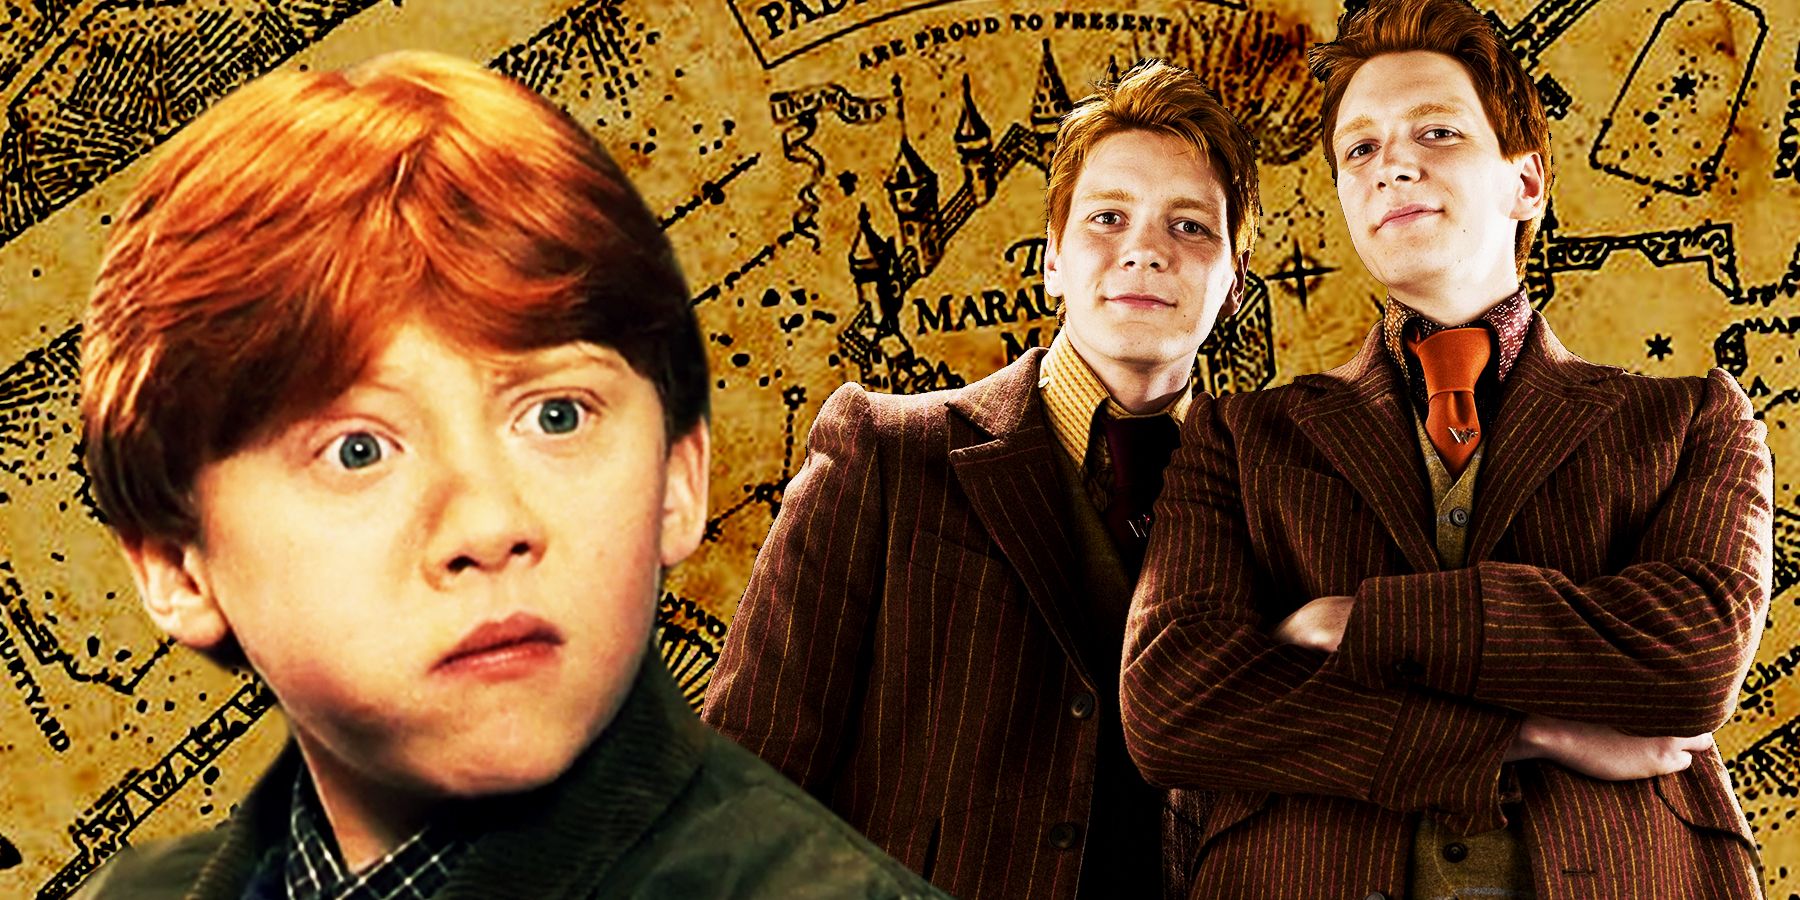 10 Times Fred and George Weasley's Pranks